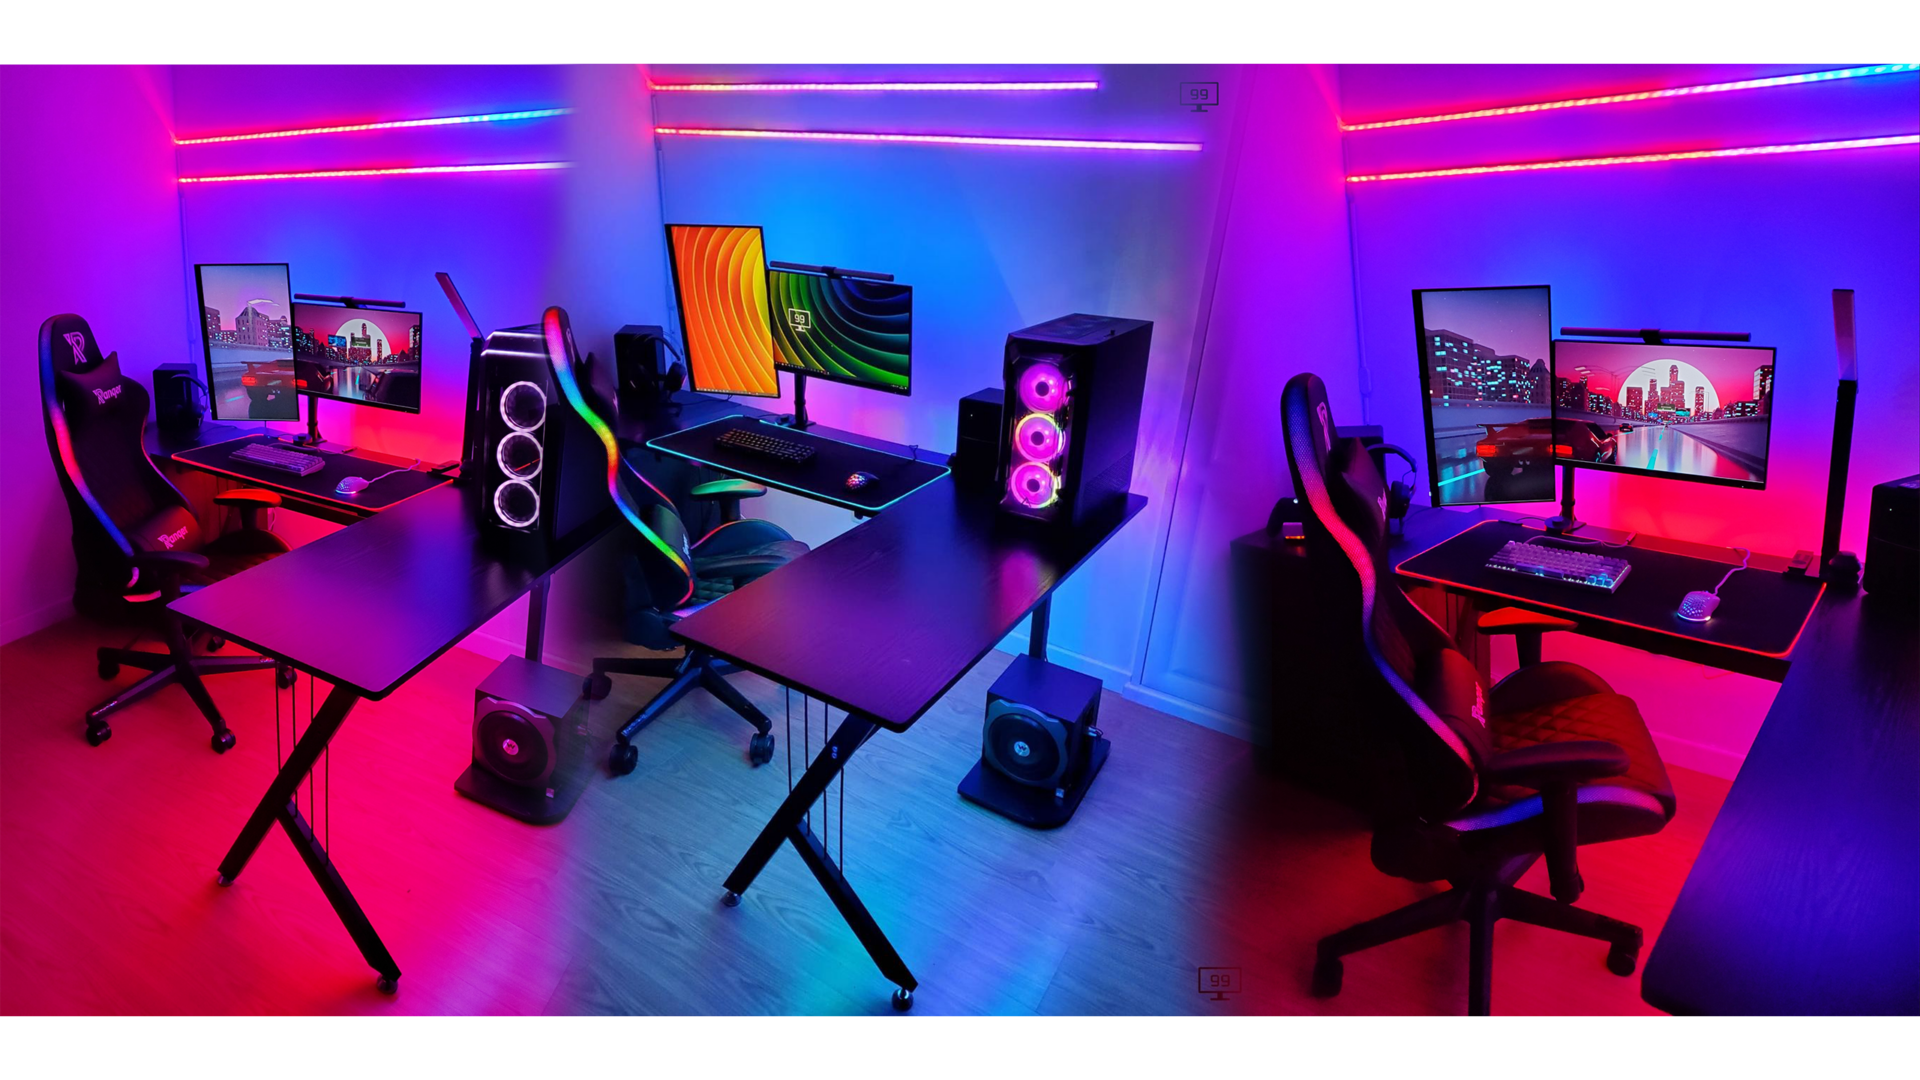 Gaming chairs with lights / LED